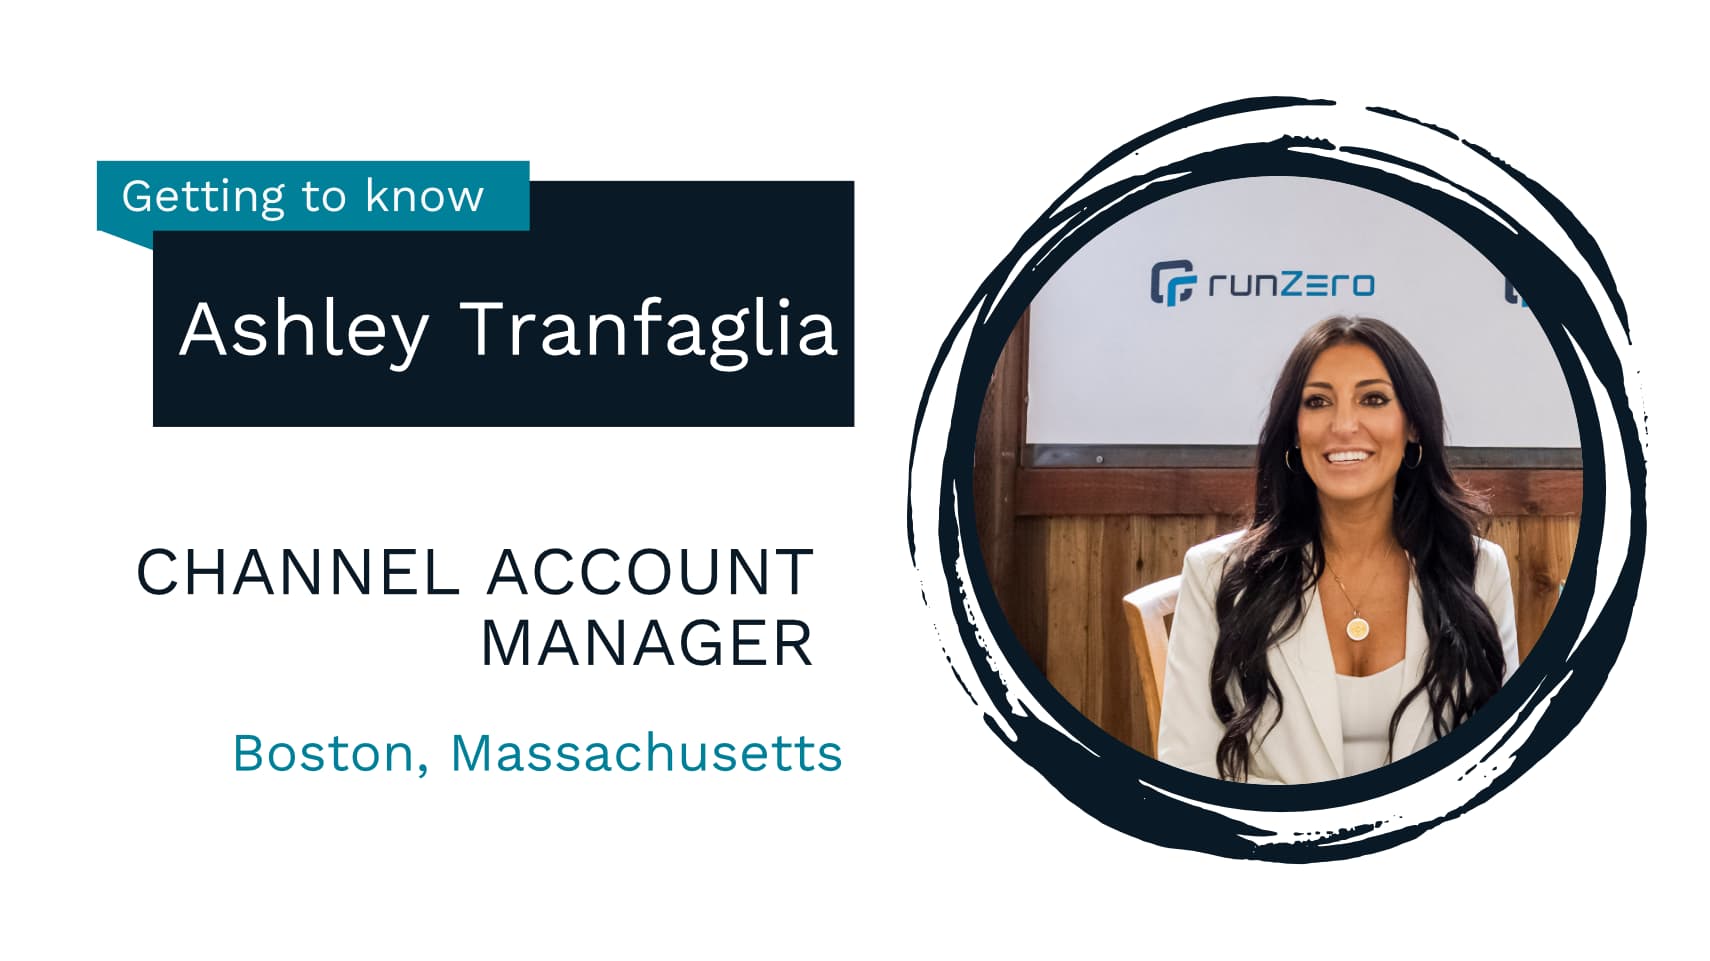 Getting to know Ashley Tranfaglia, Channel Account Manager, Boston, Massachusetts